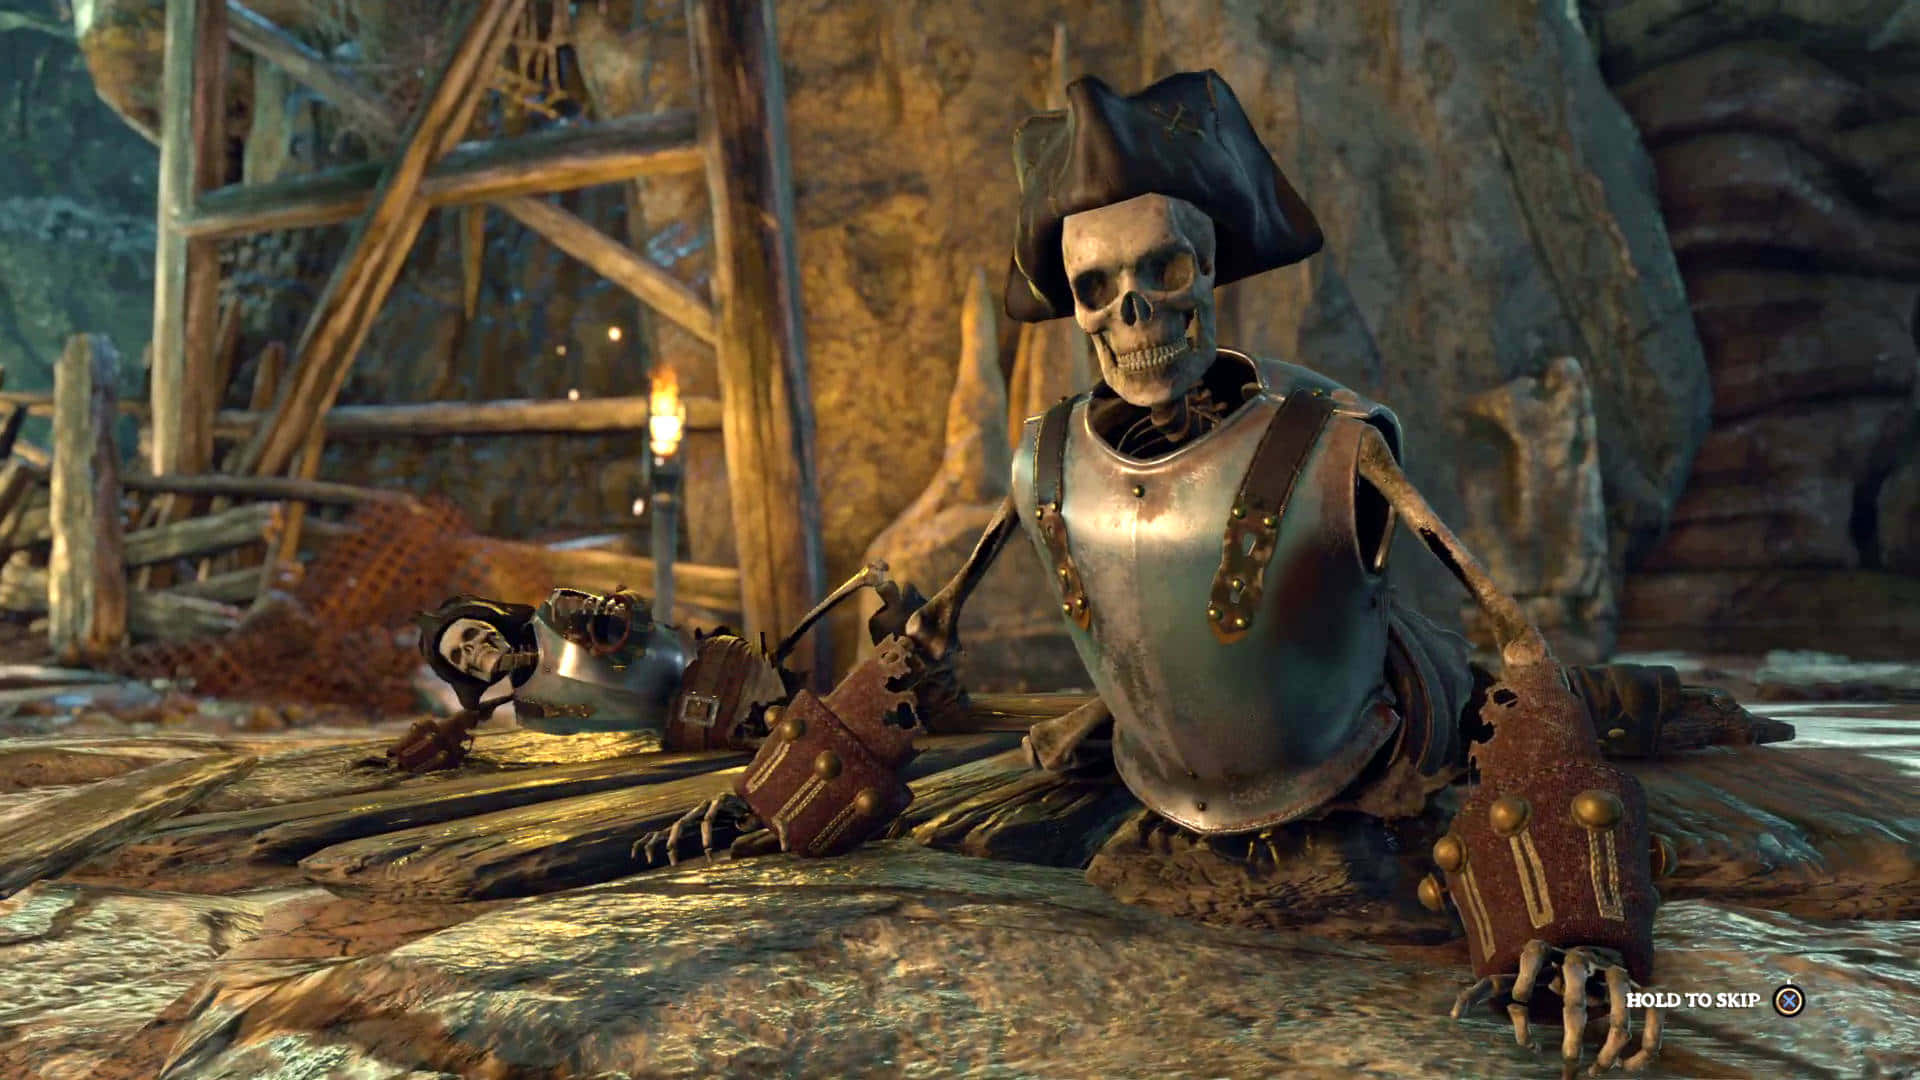 A Skeleton Is Sitting On A Rock In A Video Game